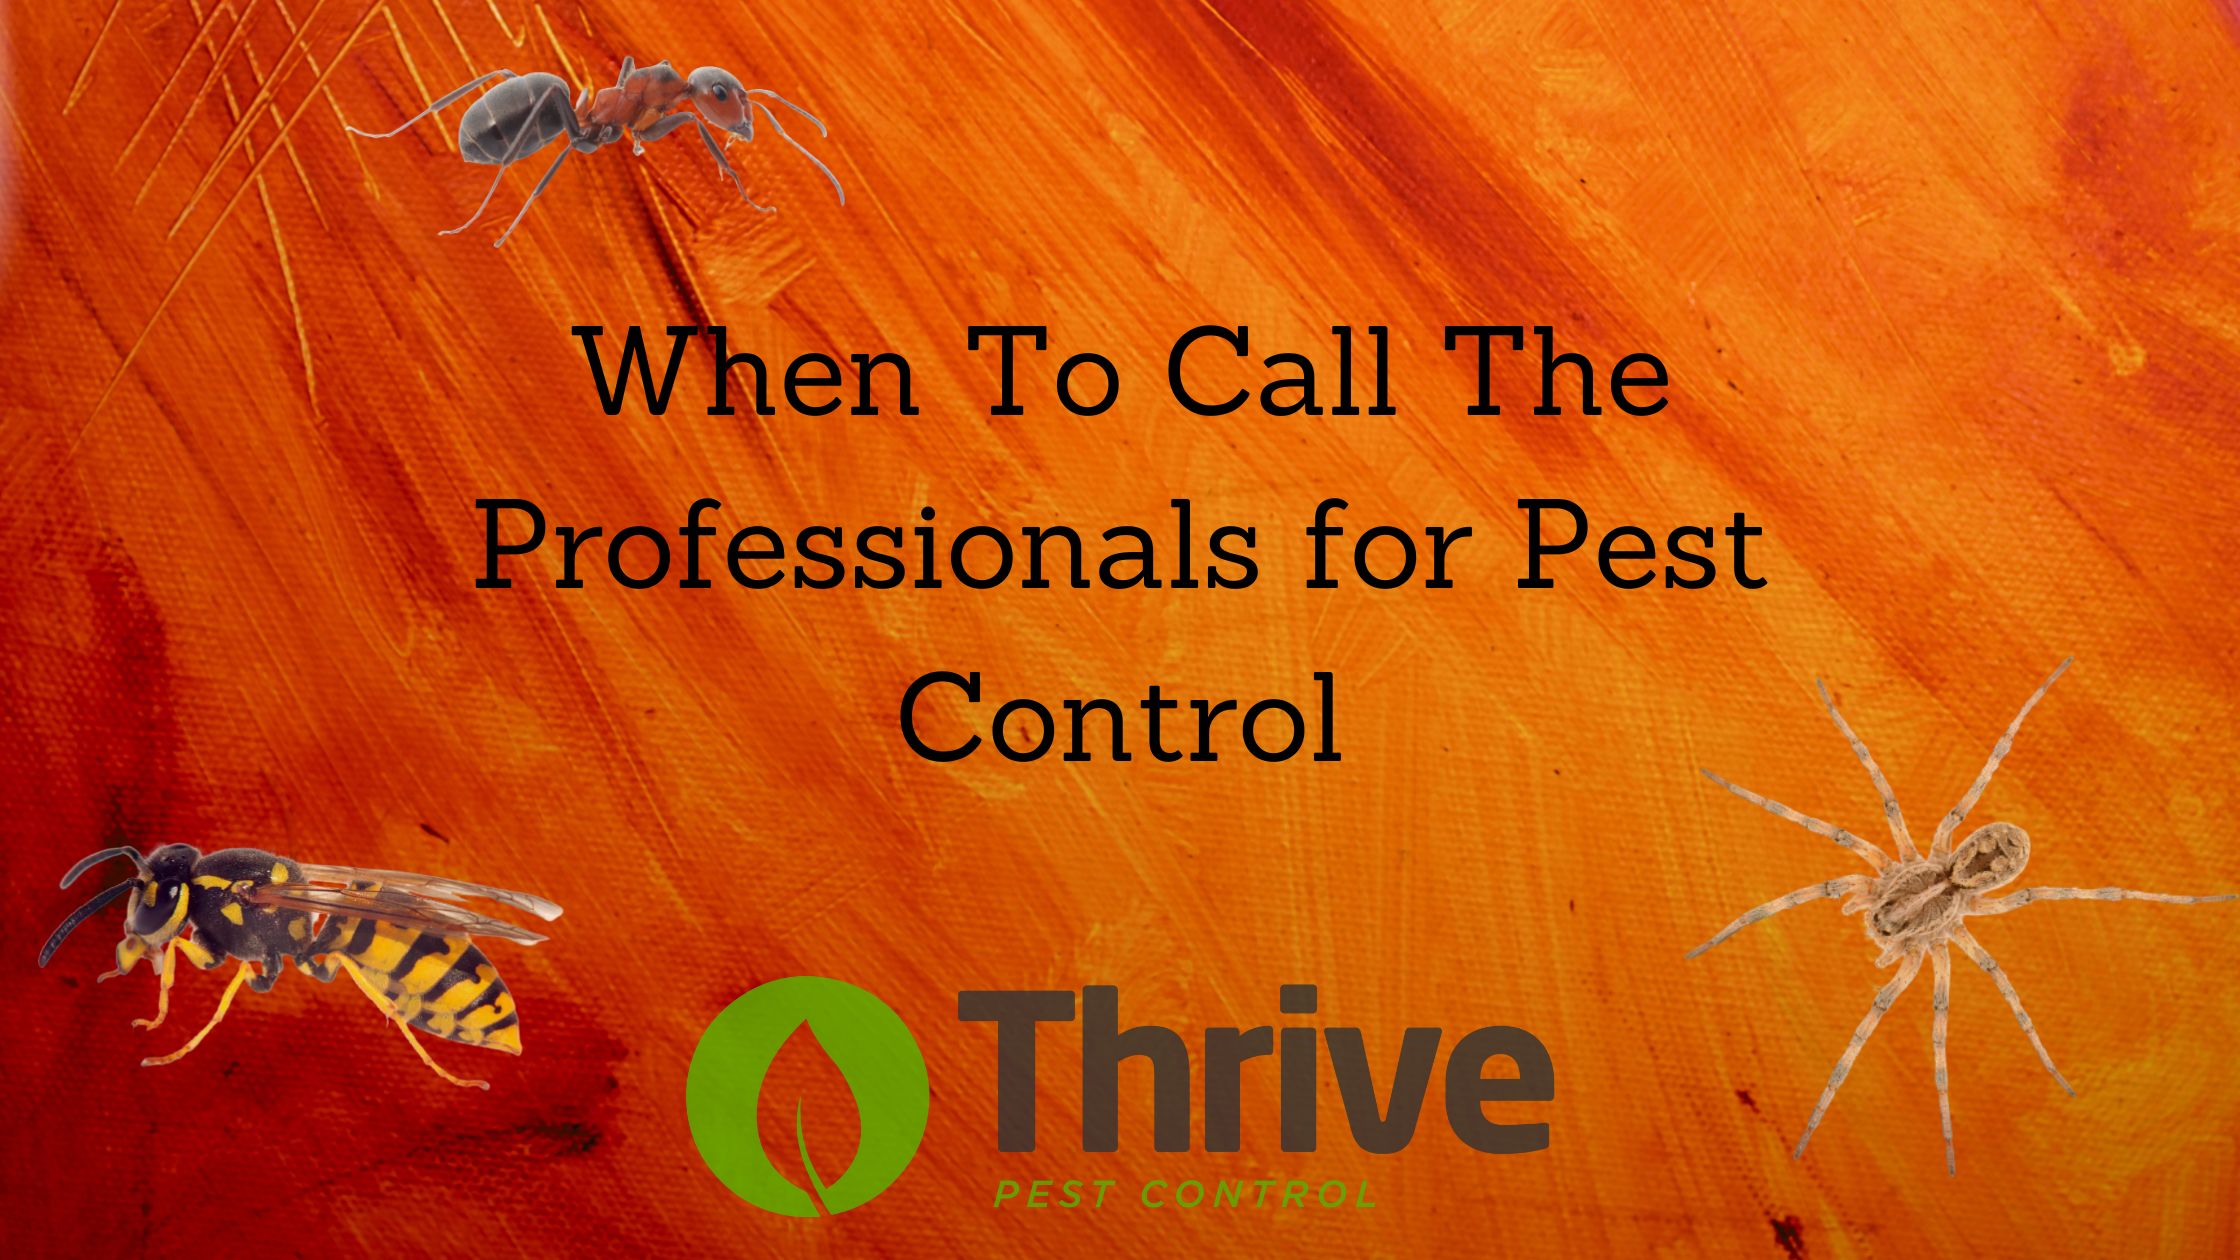 When to Call The Professionals for Pest Control